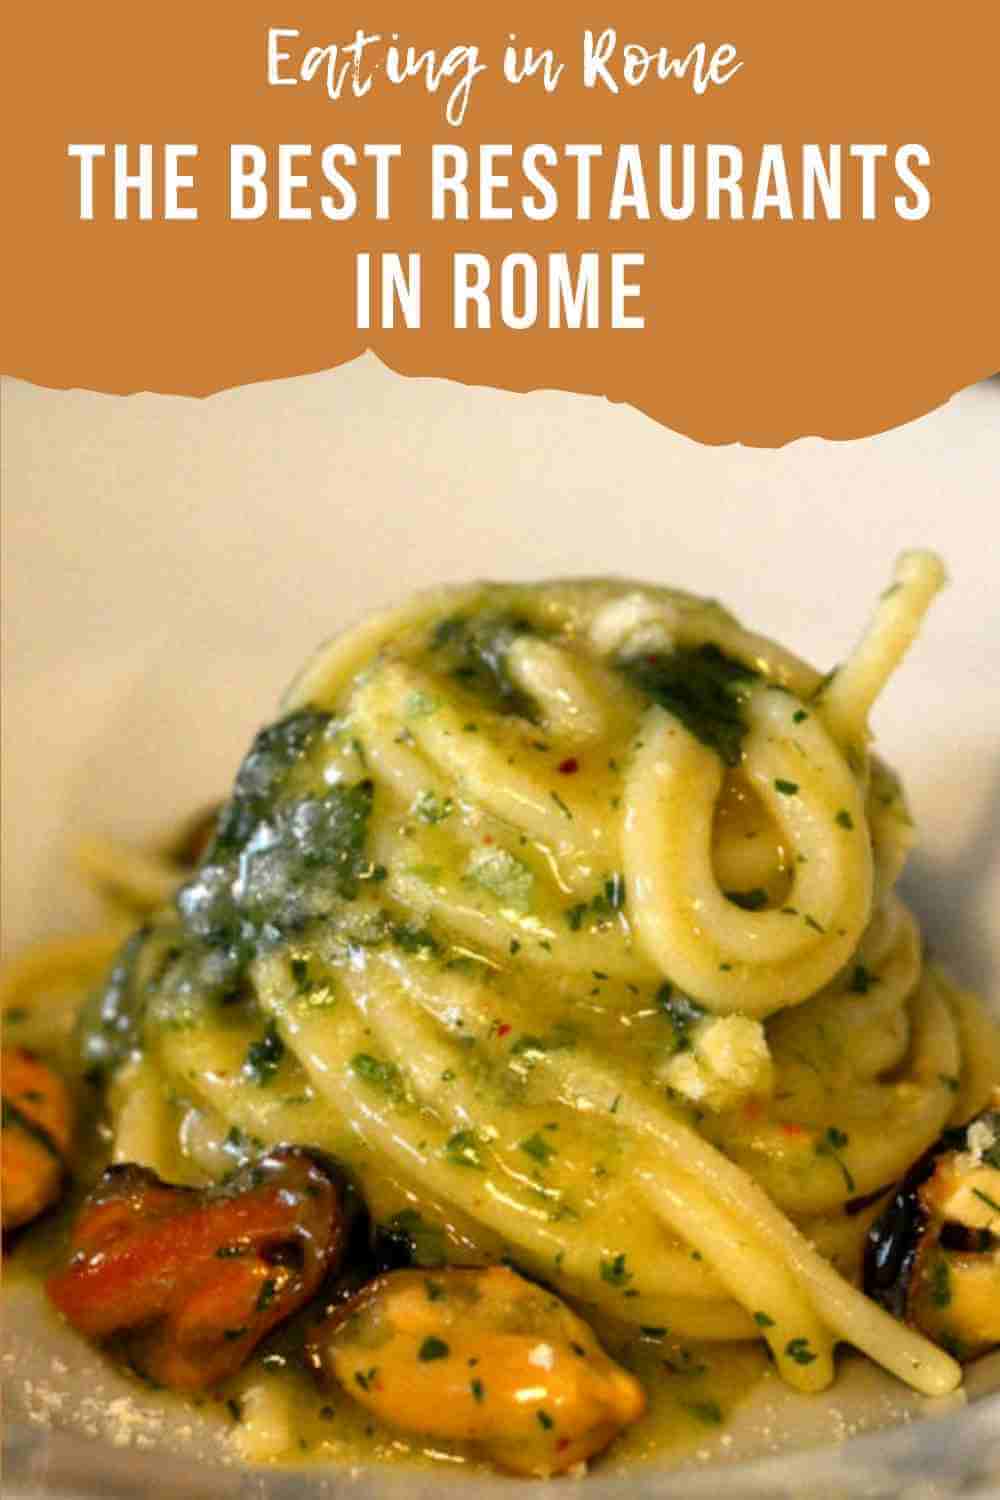 Pinterest image with one photo of a dish in Rome with caption reading "Eating in Rome. The best restaurants in Rome"